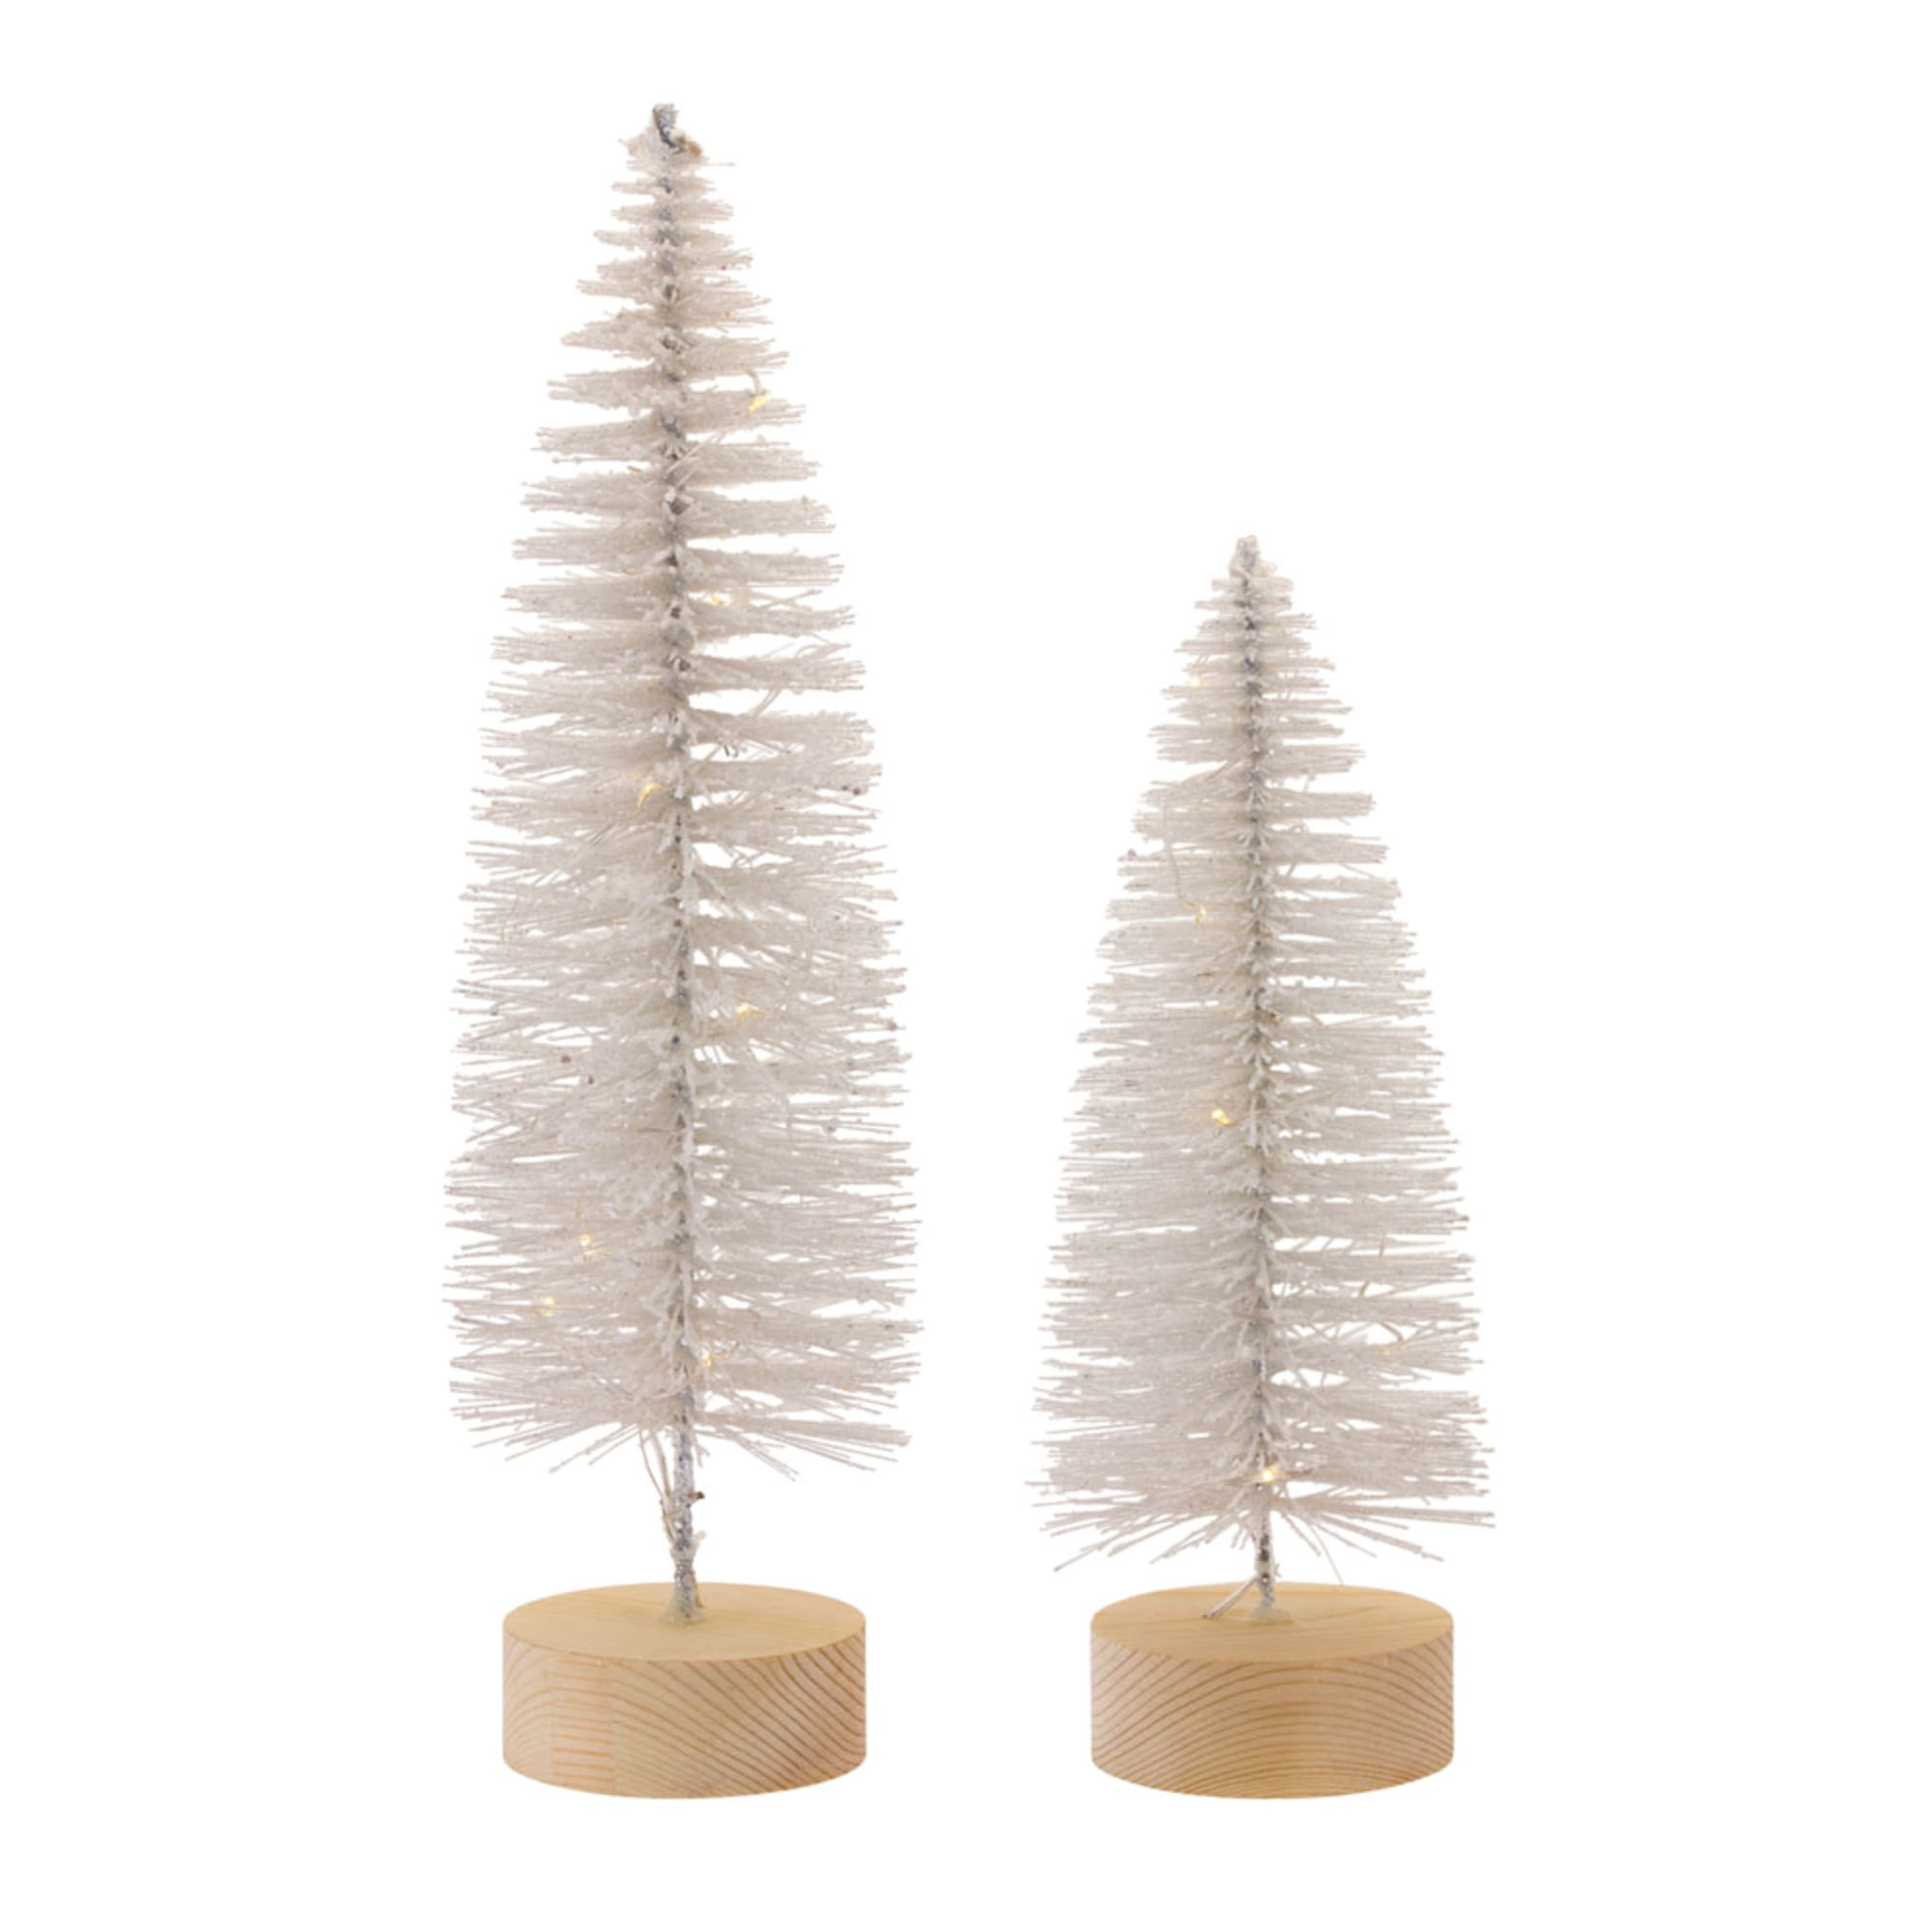 Tree with LED (Set of 4) 10.75"H, 14"H Plastic 6 Hr Timer 3 AAA Batteries, Not Included